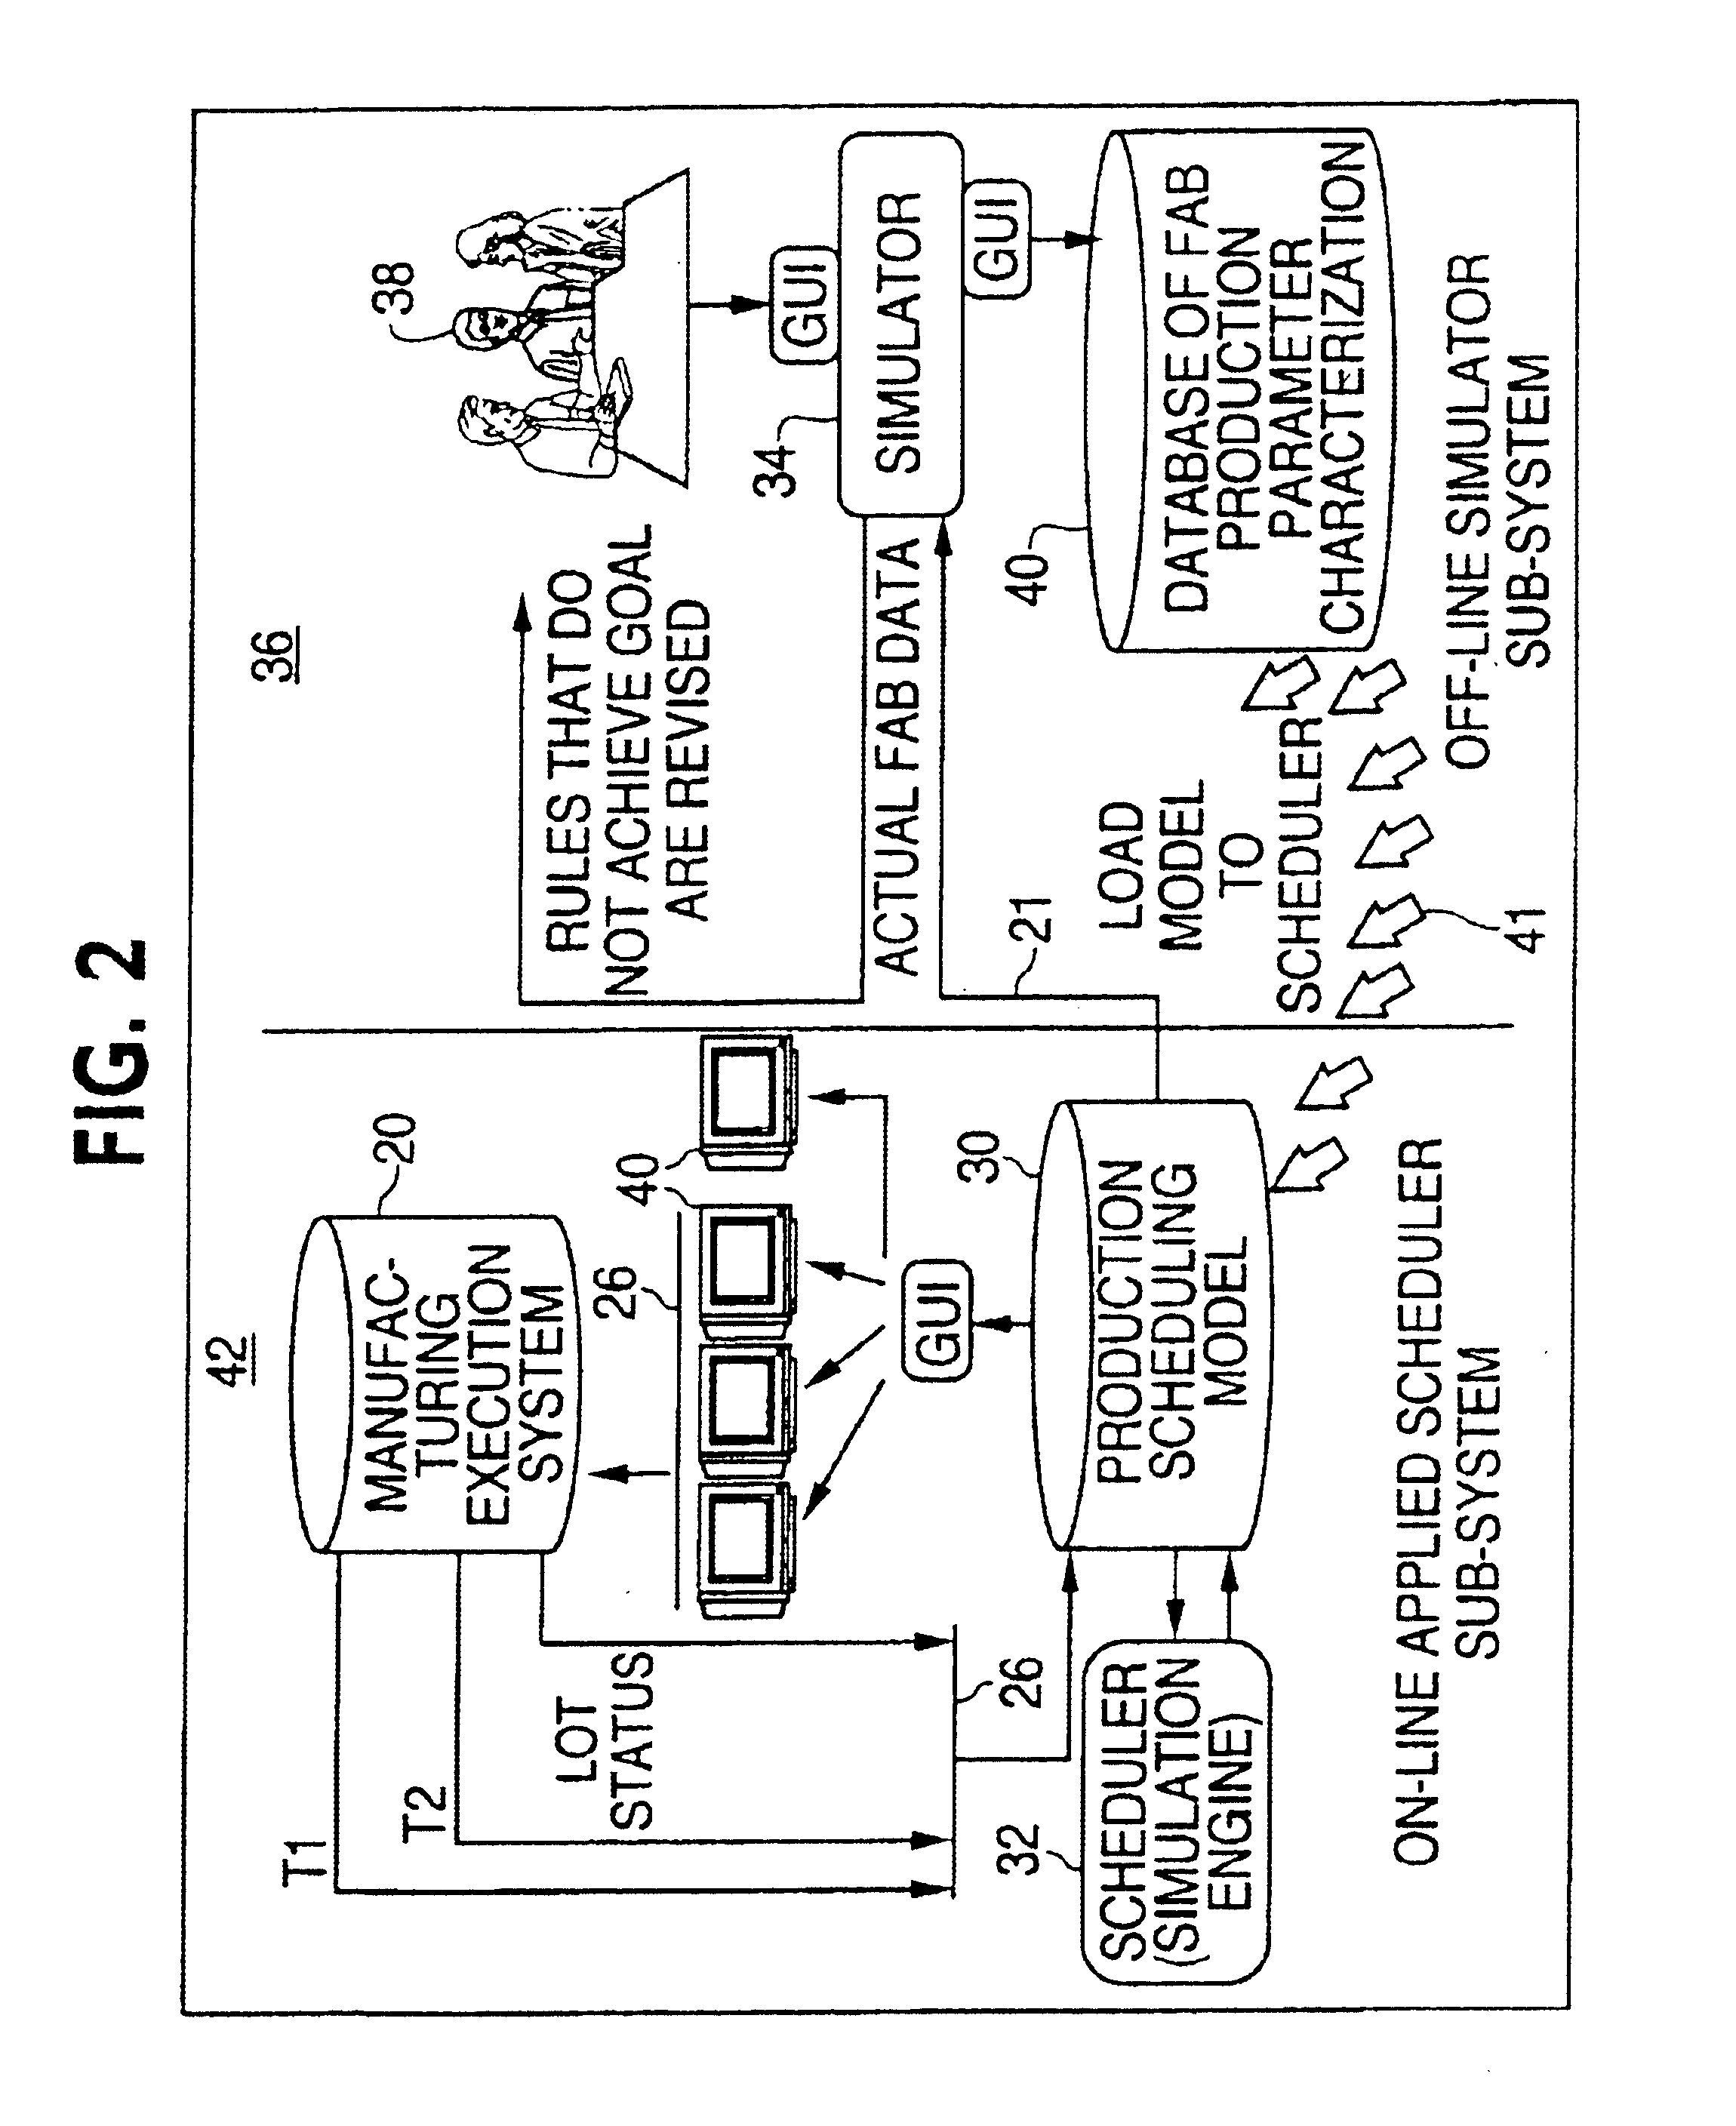 Integrated wafer fabrication production characterization and scheduling system